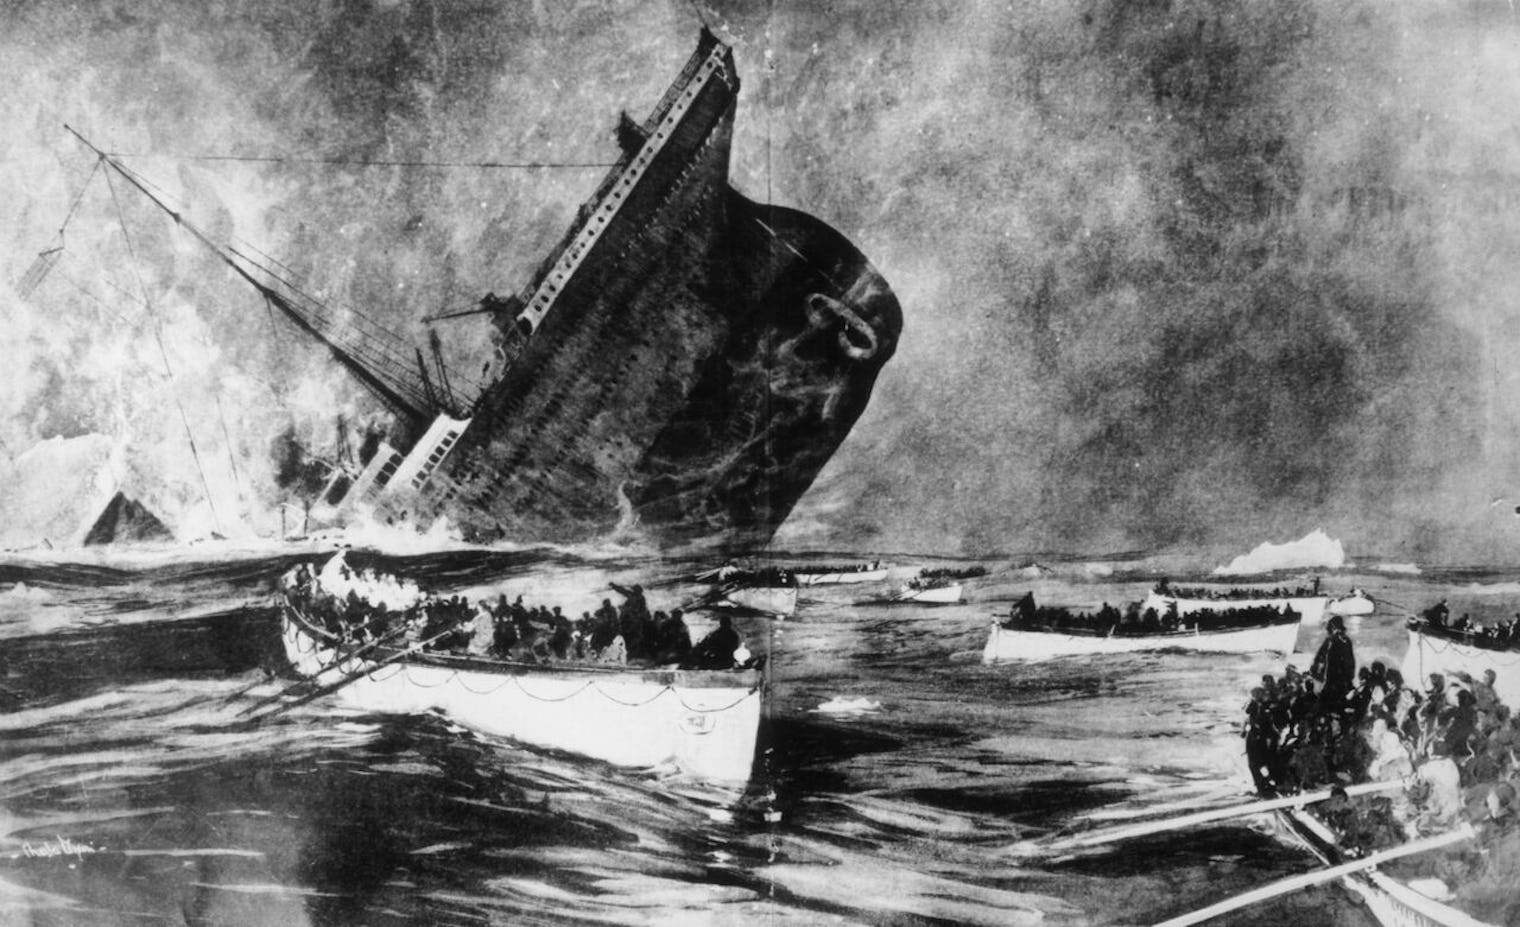 9 Eerily Realistic Drawings Of The Titanic As It Sank, Drawn Shortly